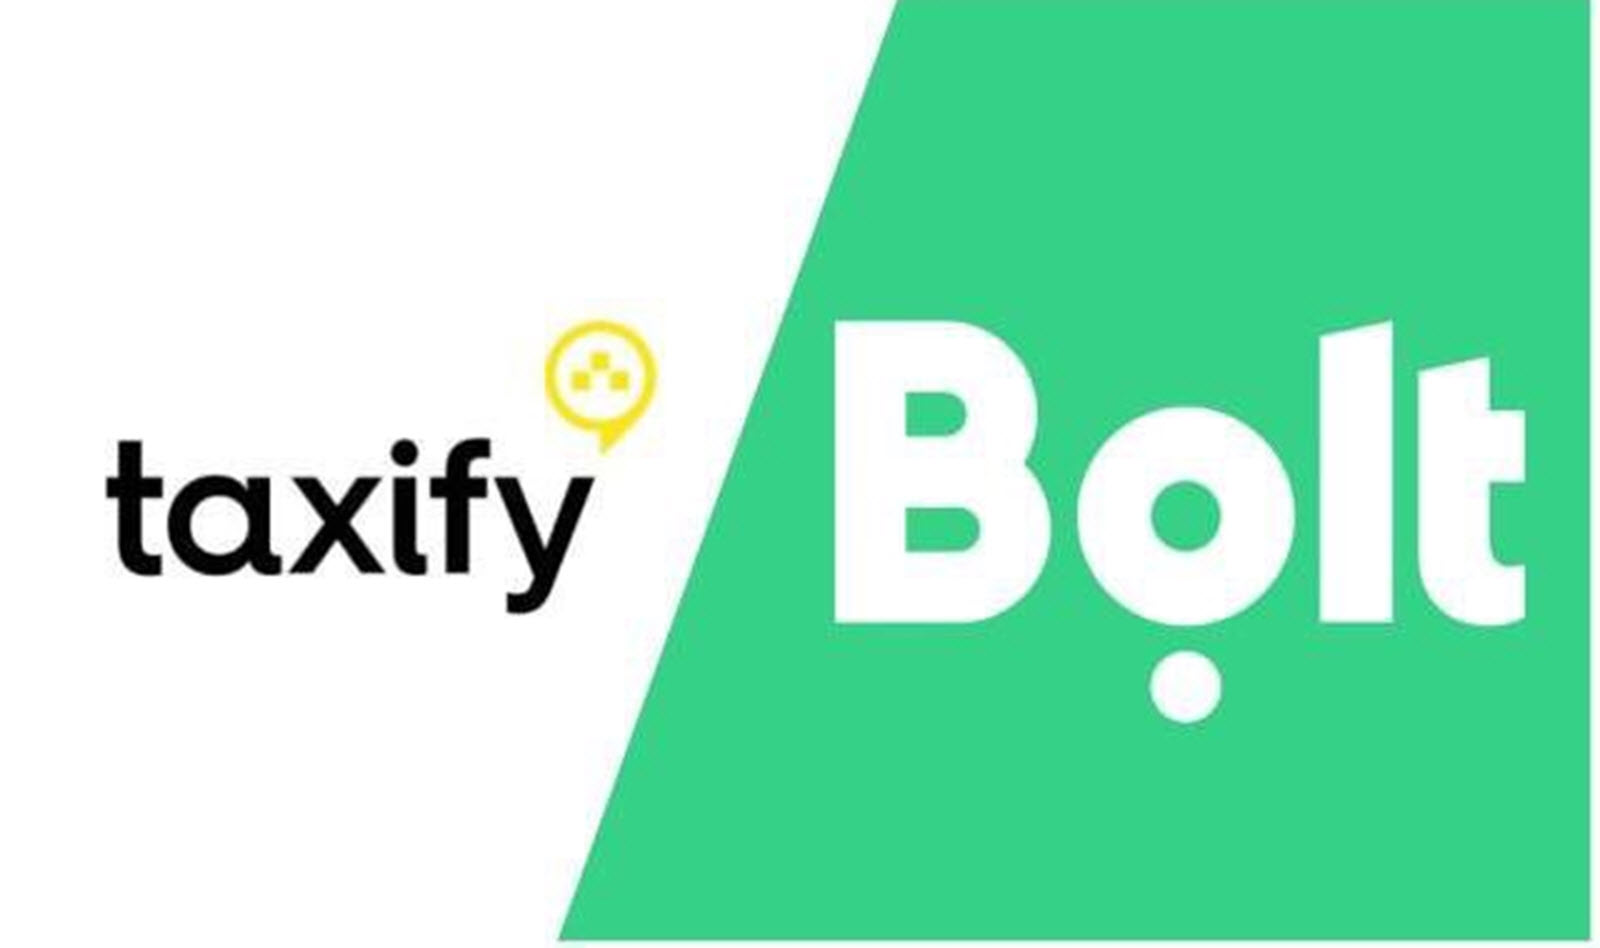 taxify is now bolt